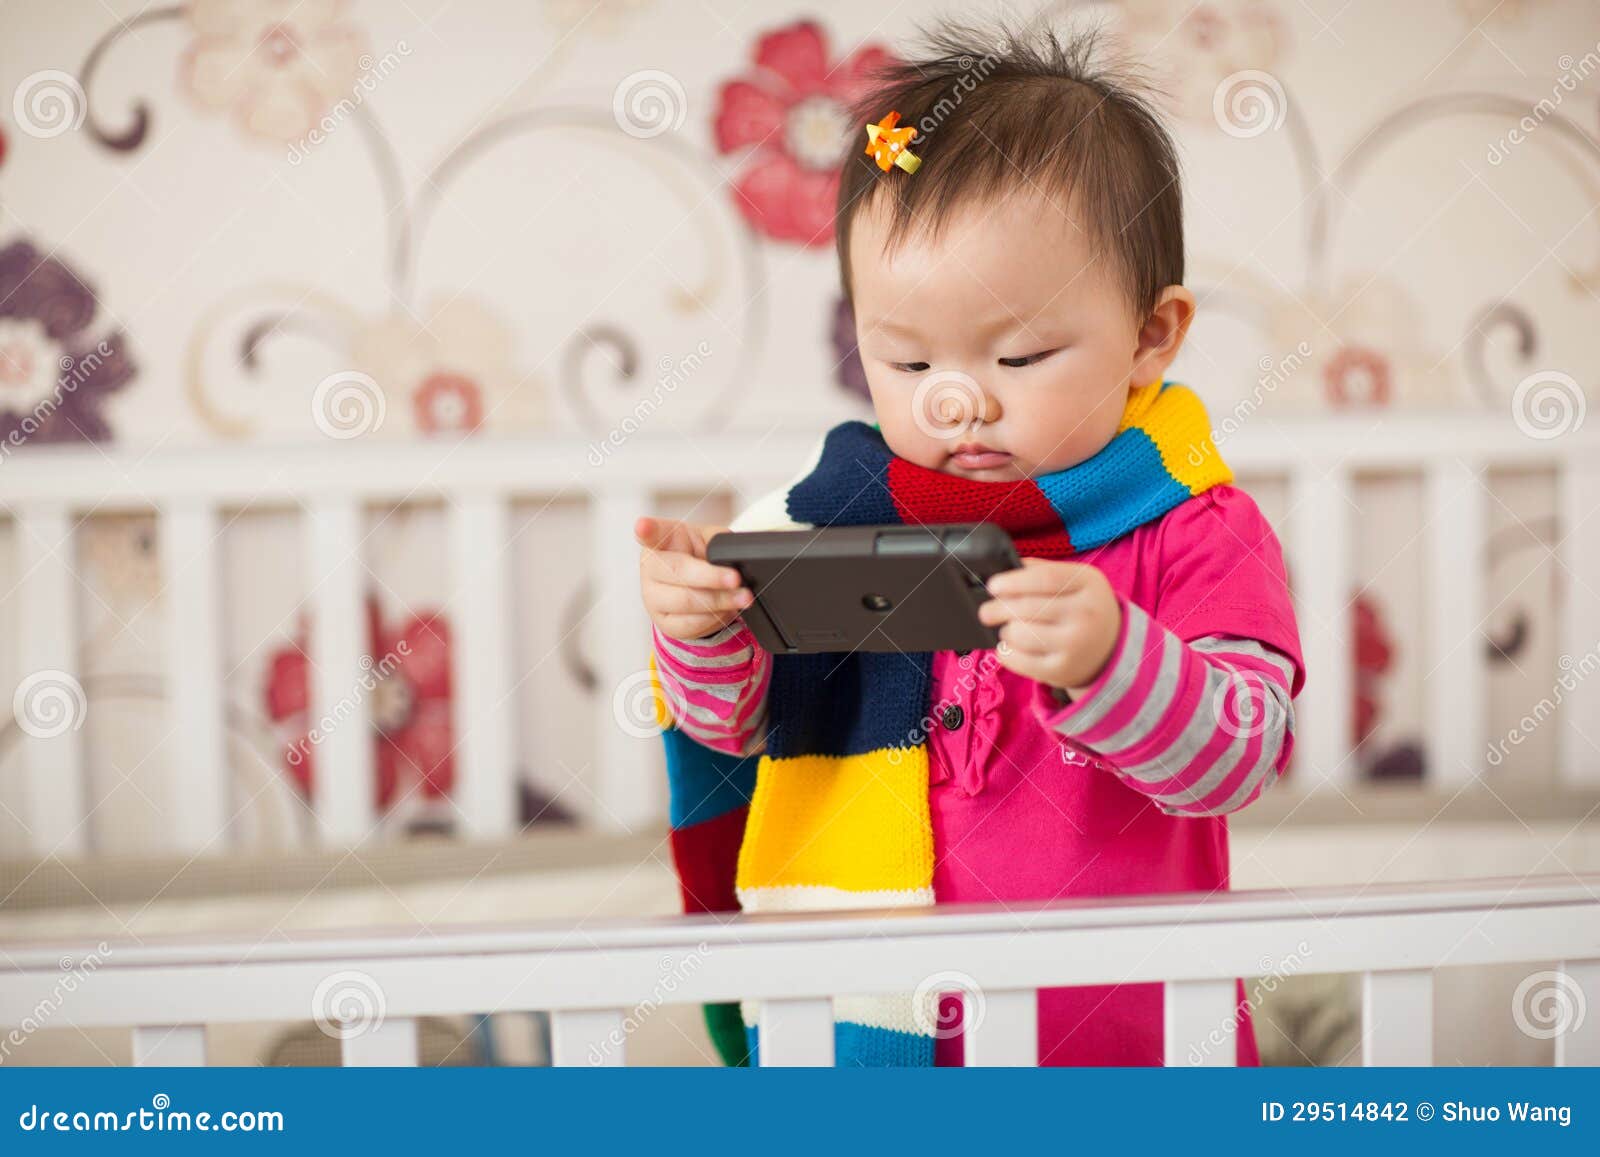 kid playing cellphone